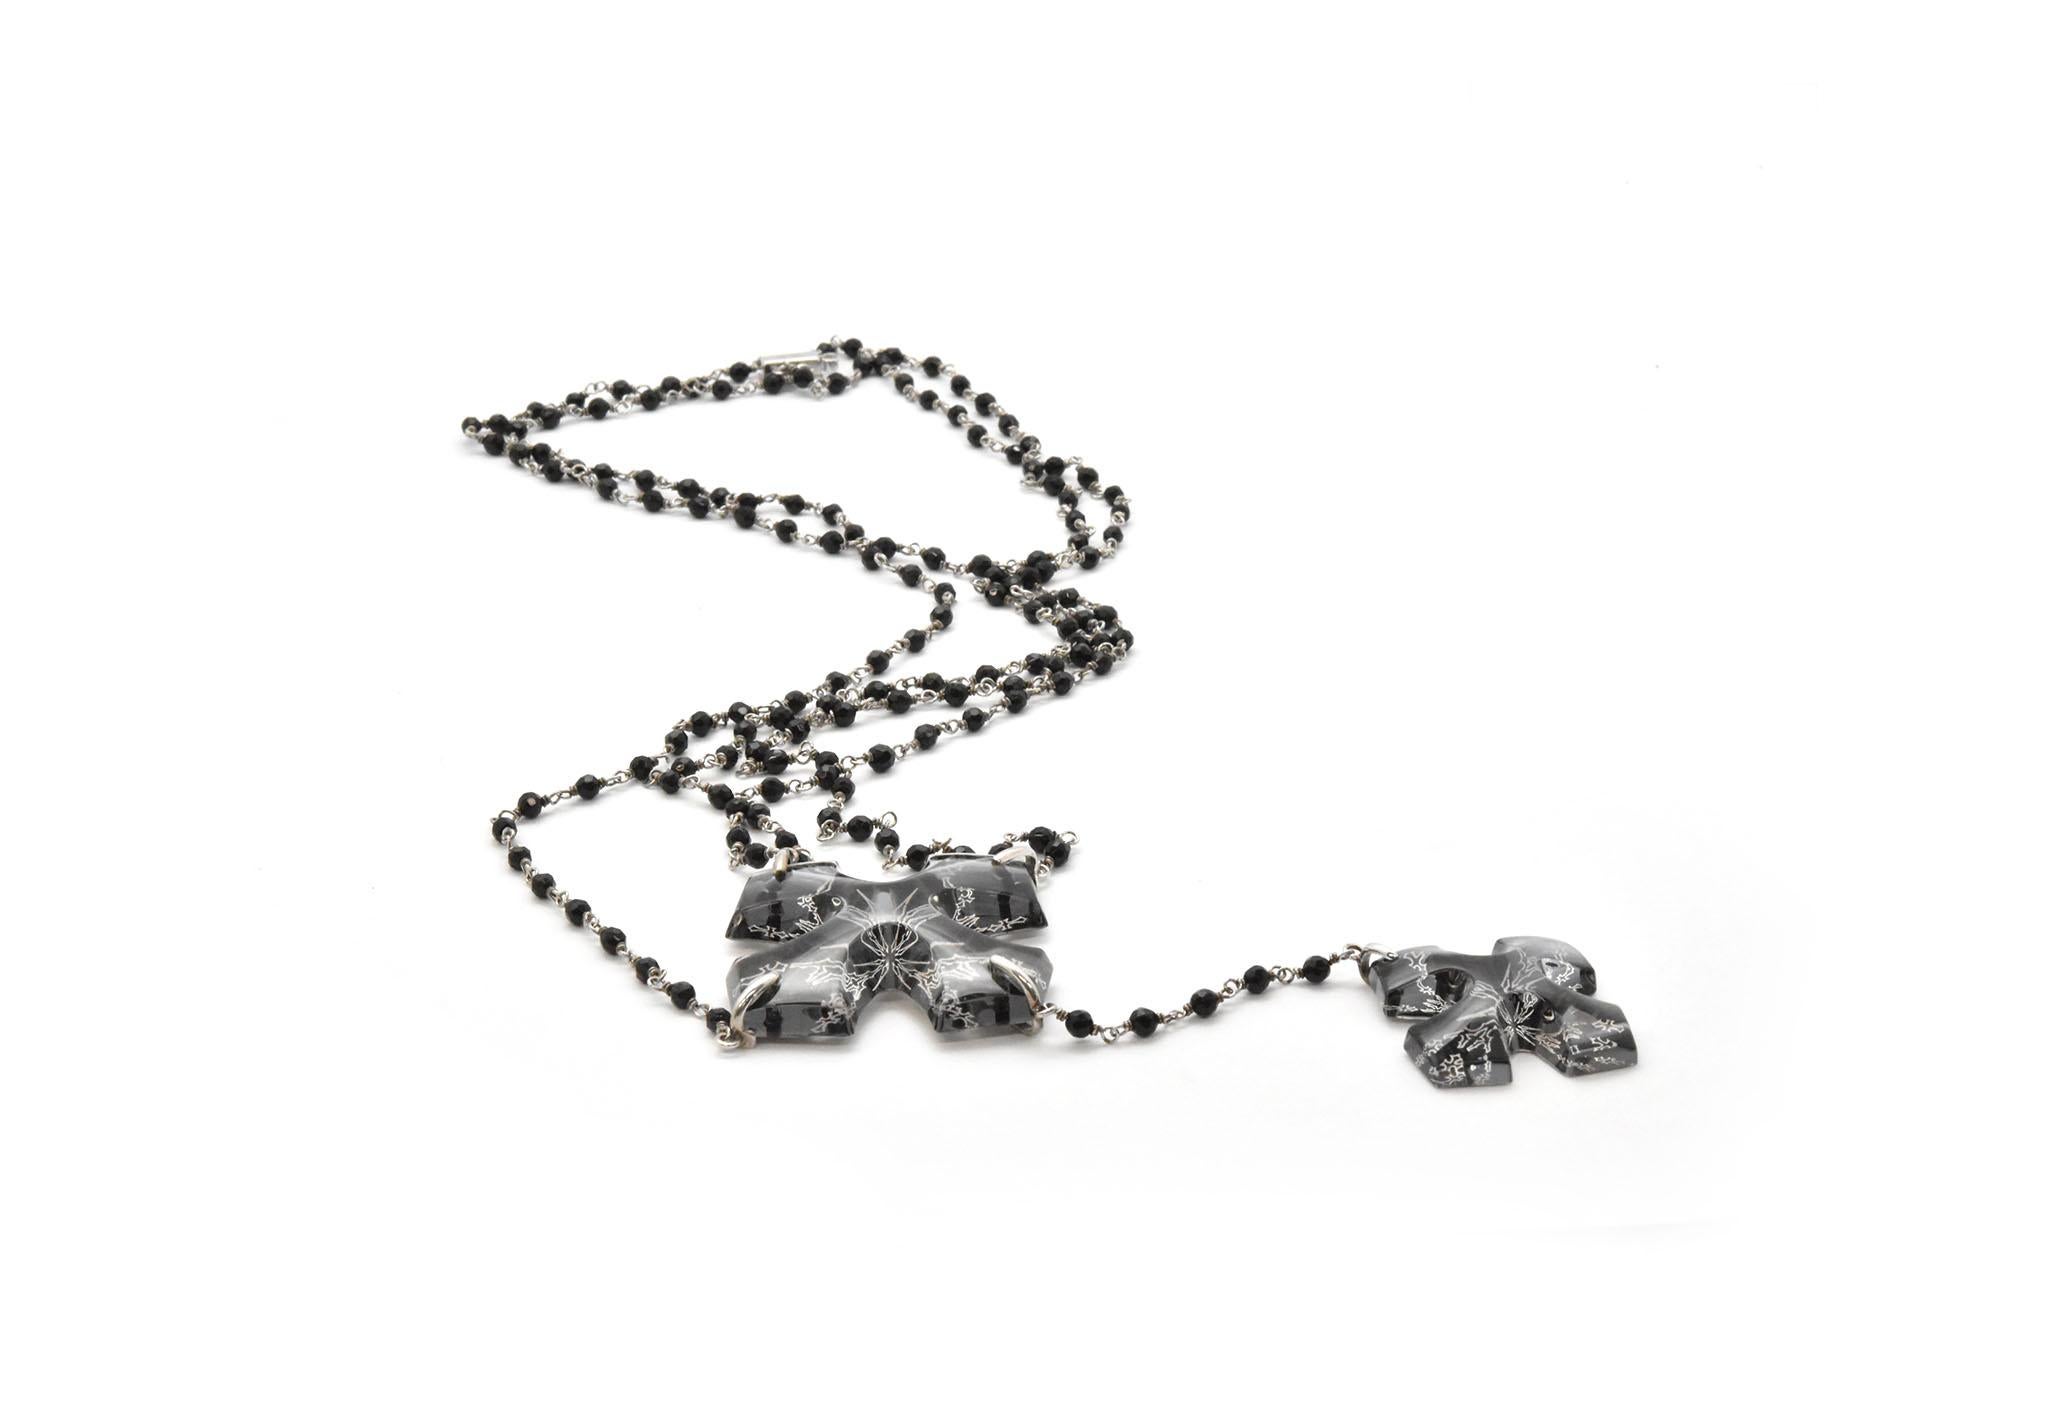 This necklace is designed by Baccarat in sterling silver and full lead crystal. A double cross pendant is the focal point of the necklace with a unique black bead and sterling chain series. The pendant section measures 5.5” long, and the largest